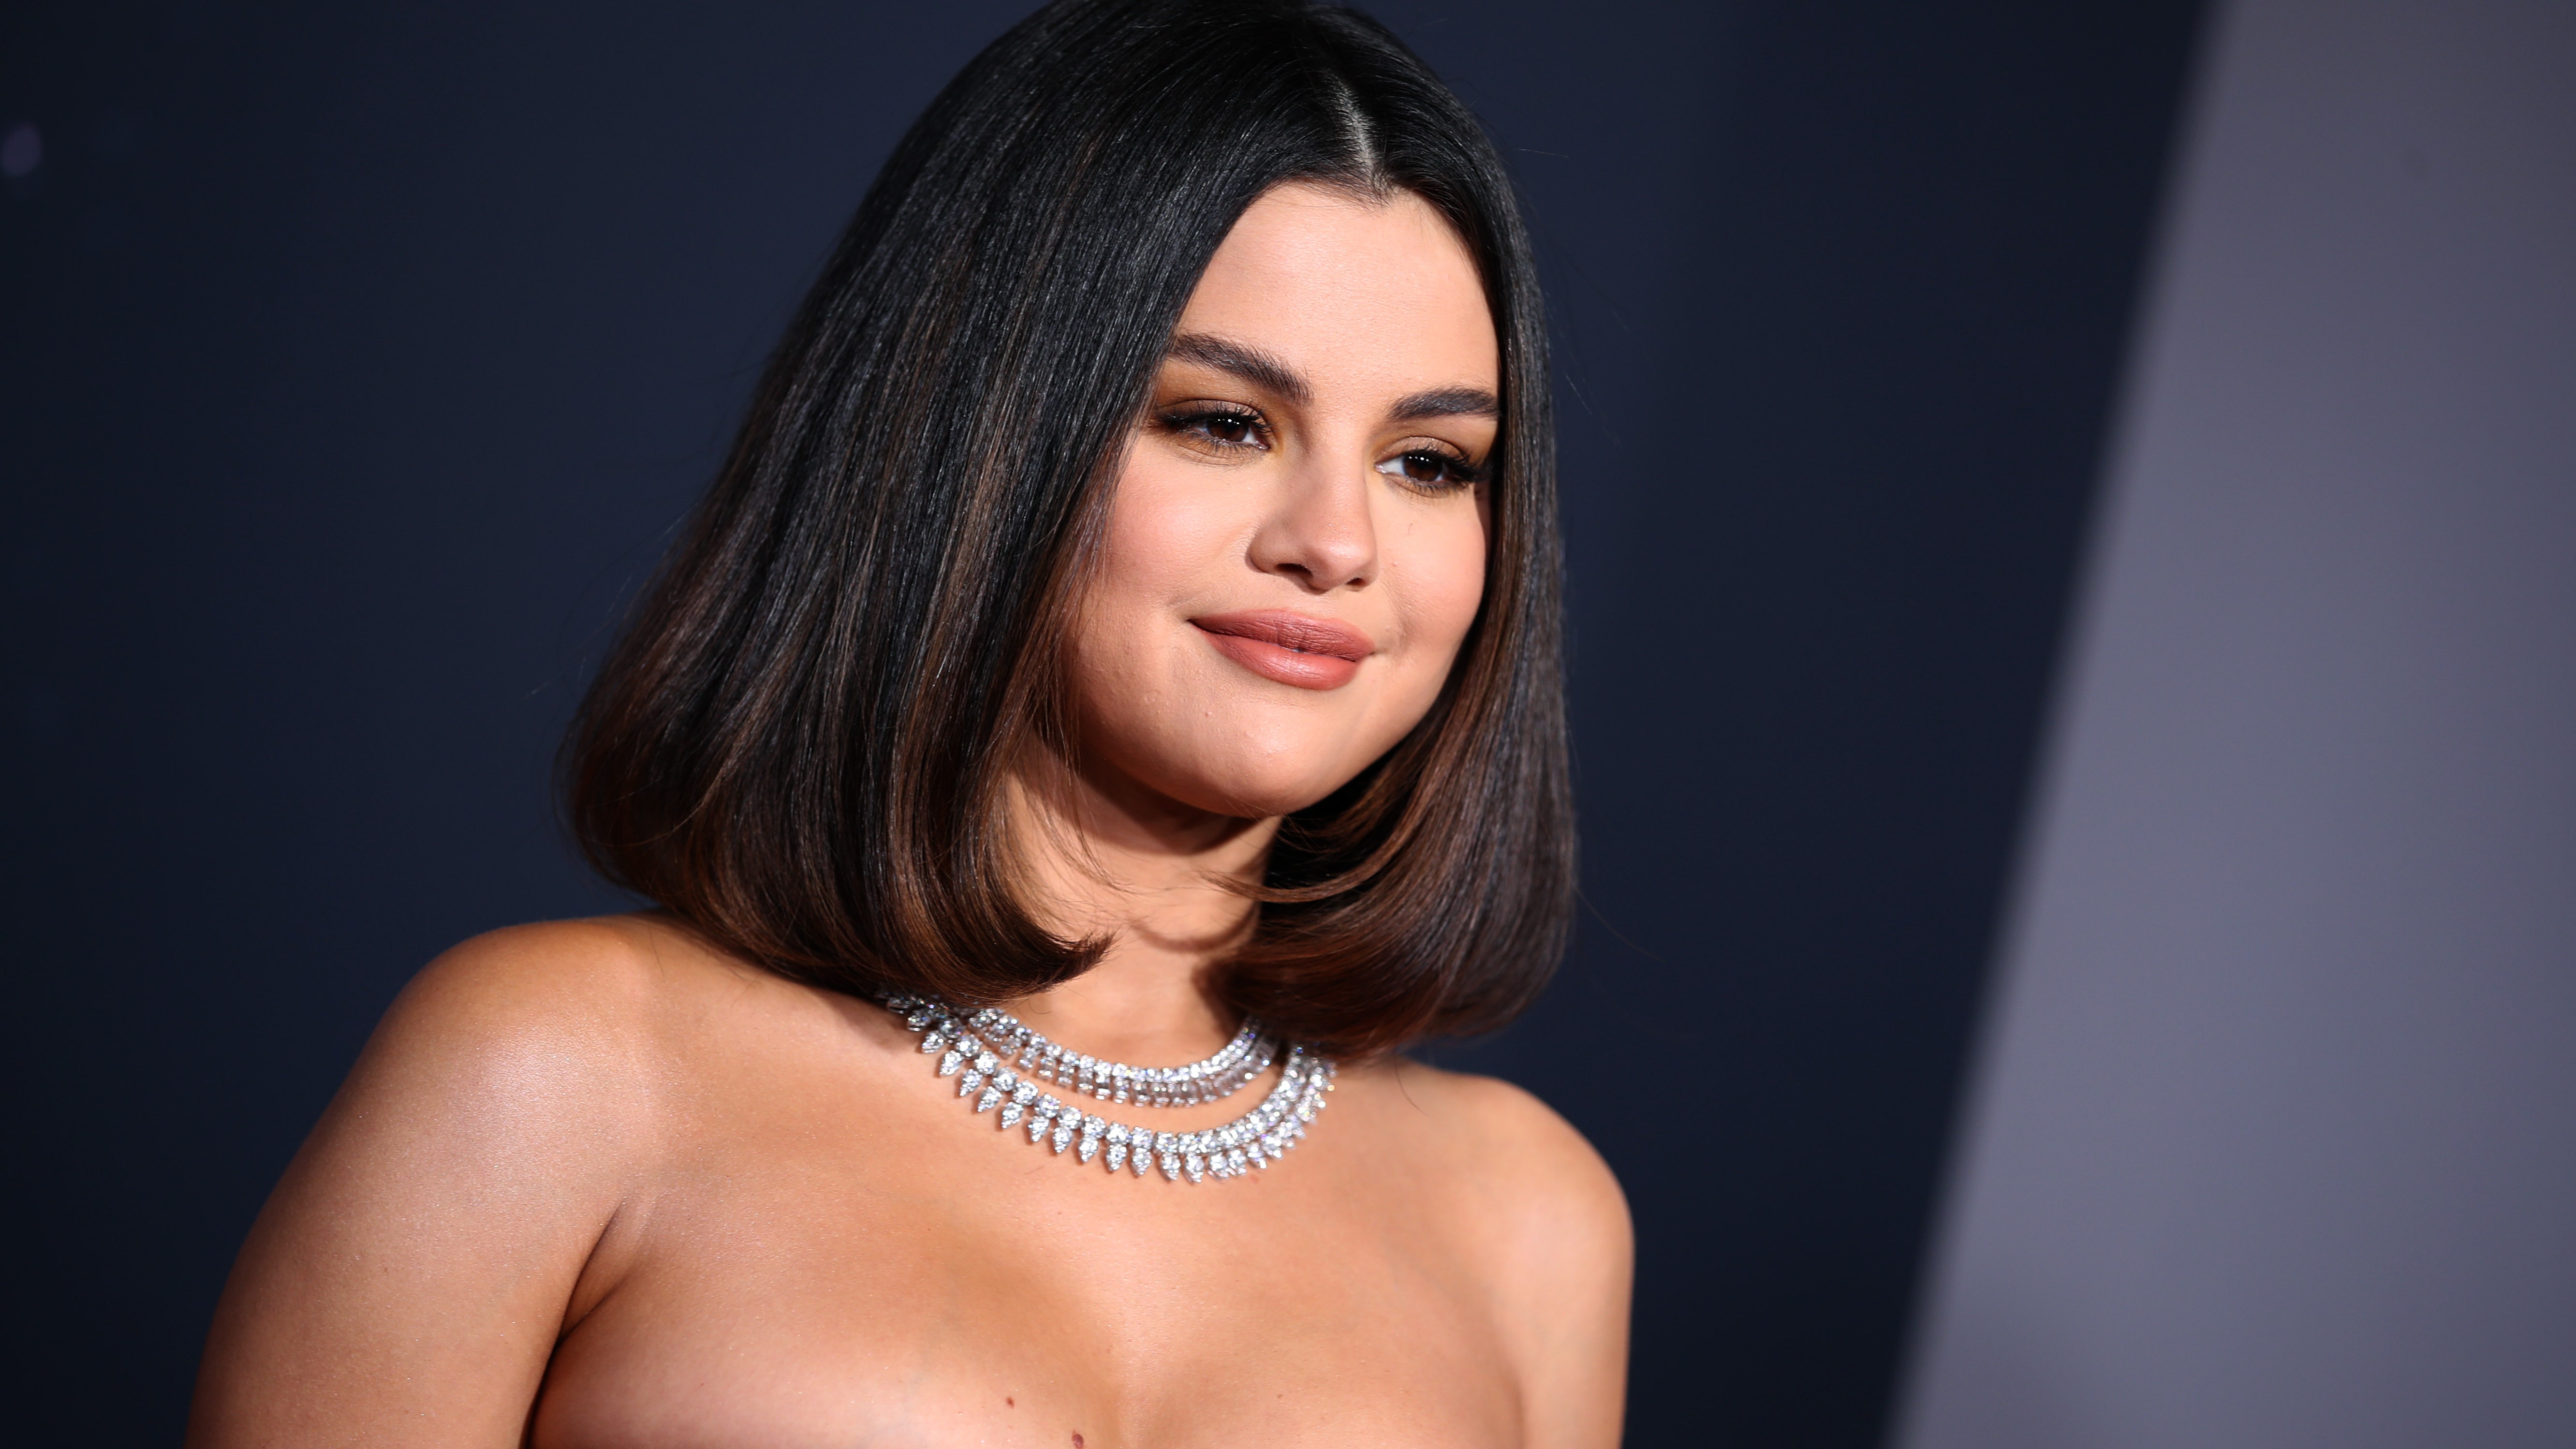 andrew musgrove recommends selena gomez naked video pic